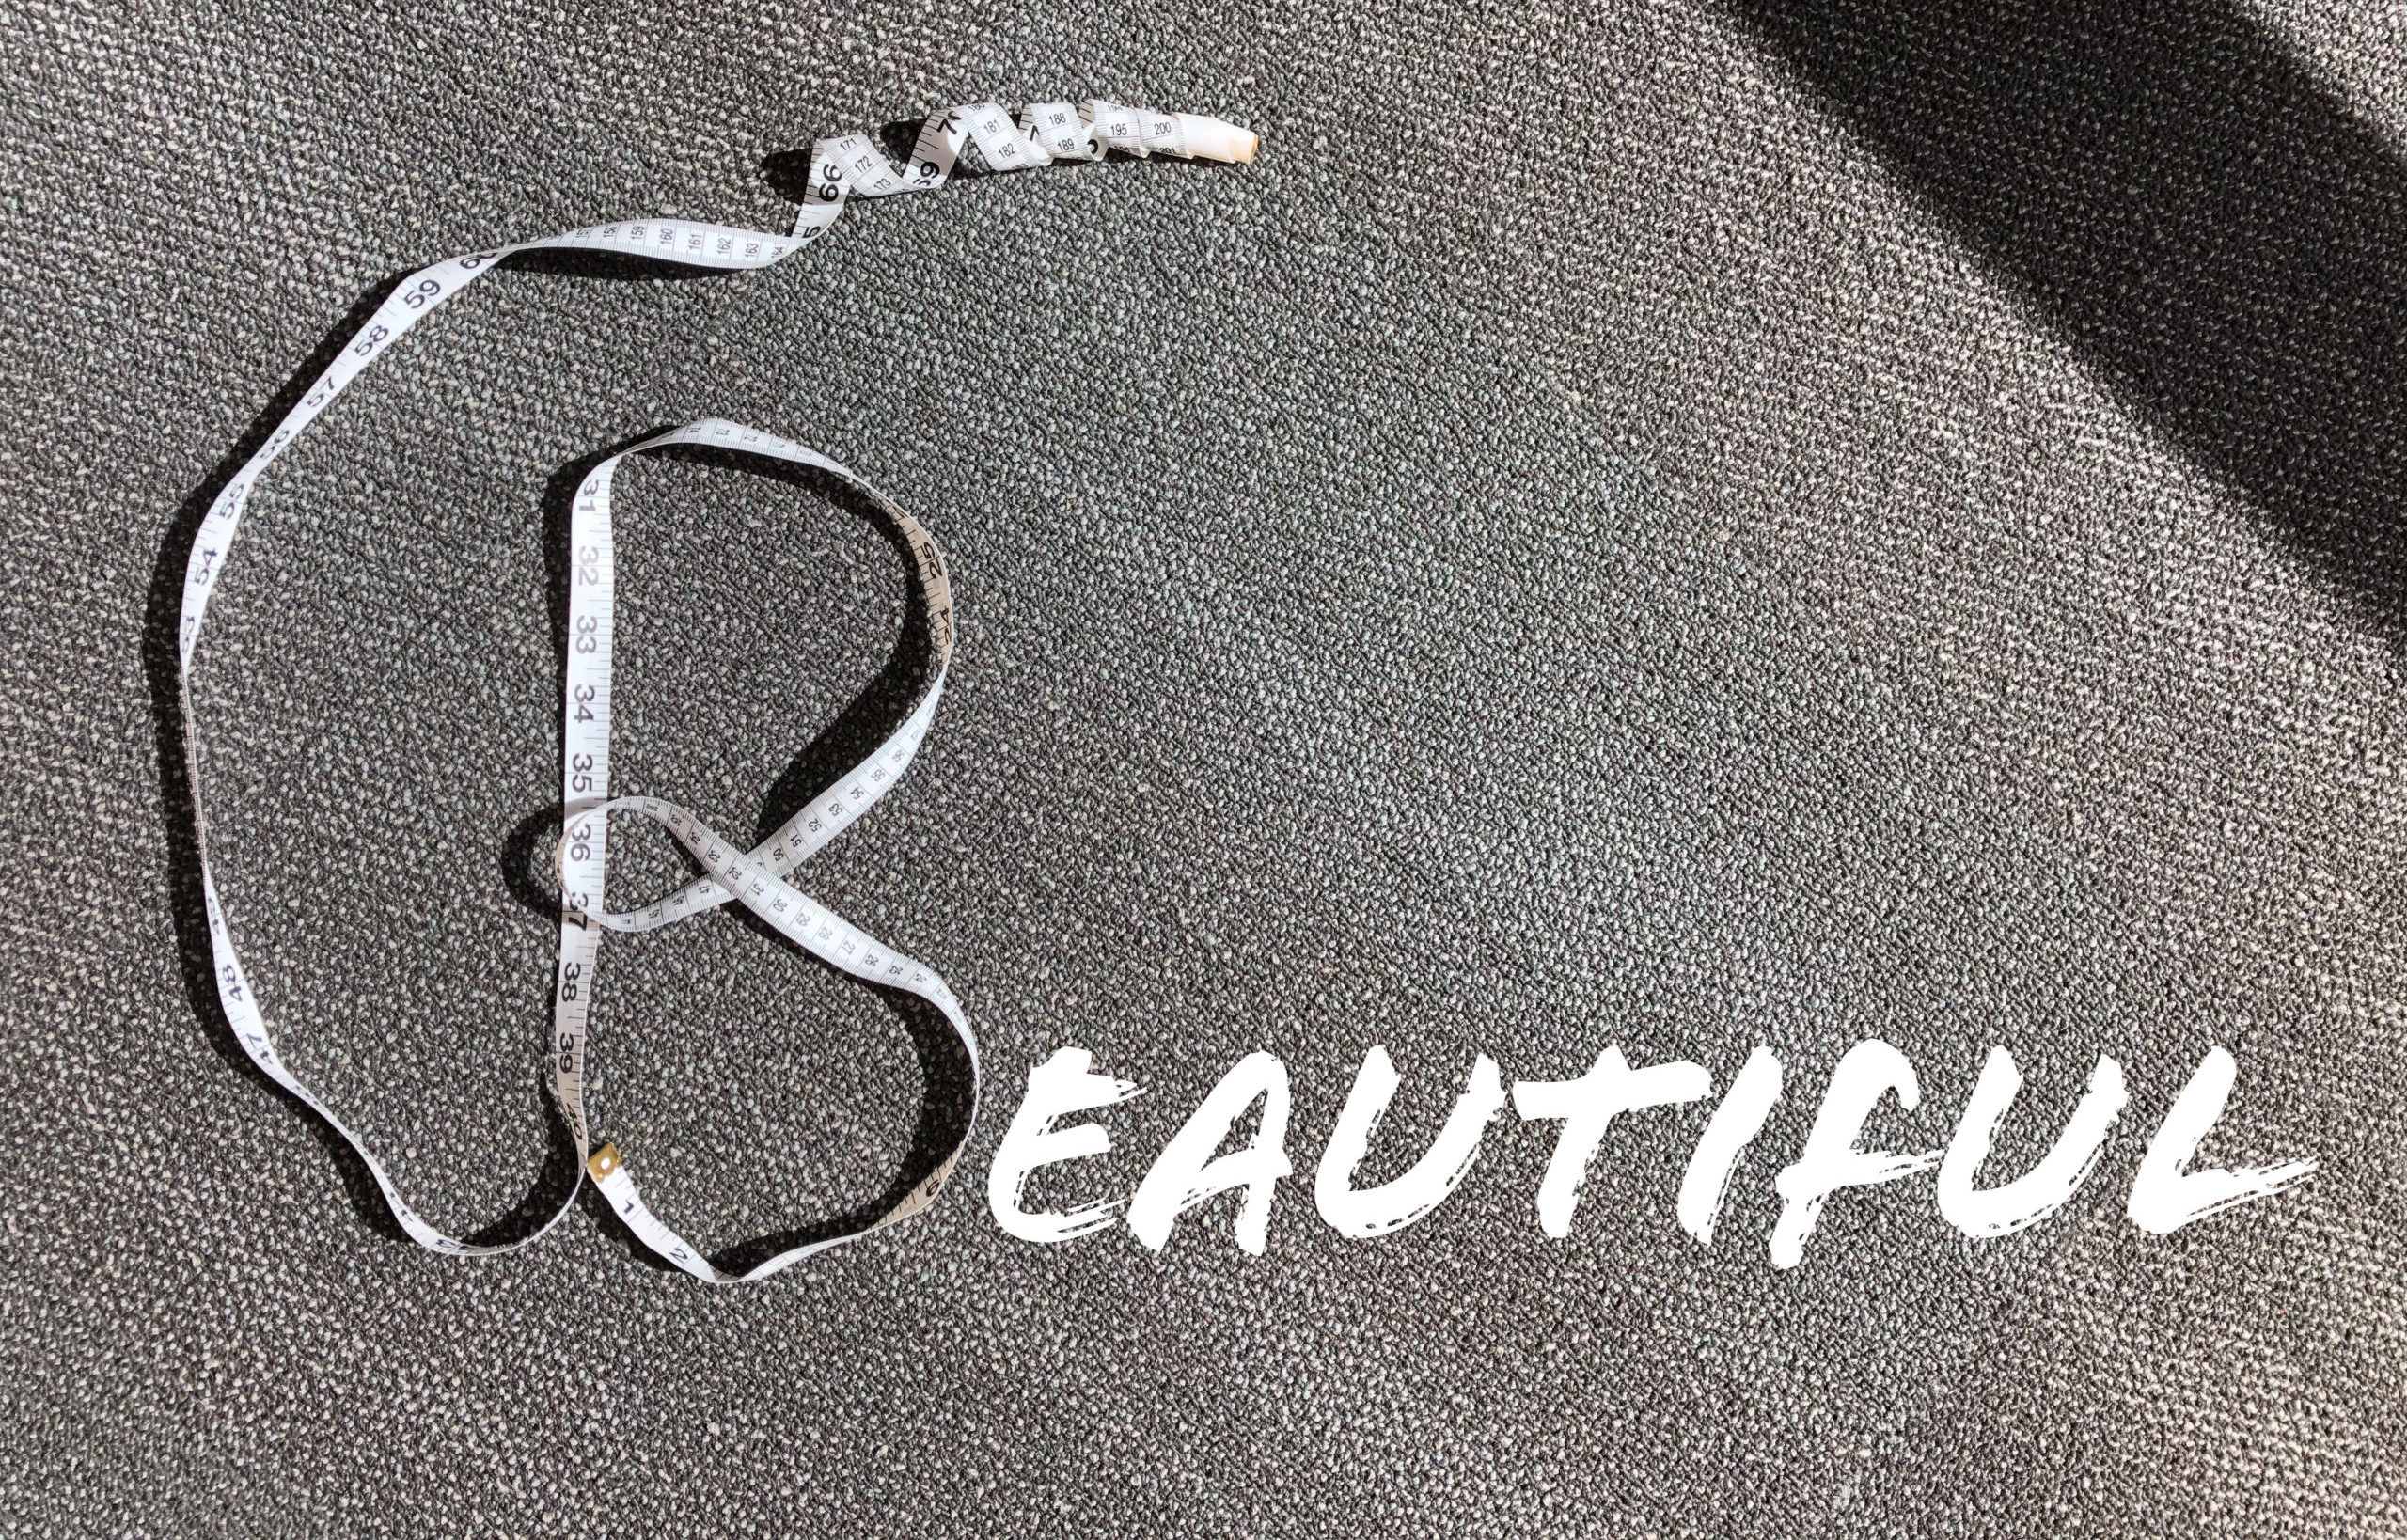 Letter "B" made with a measuring tape. The rest of the word "beautiful" spelt out win letters.